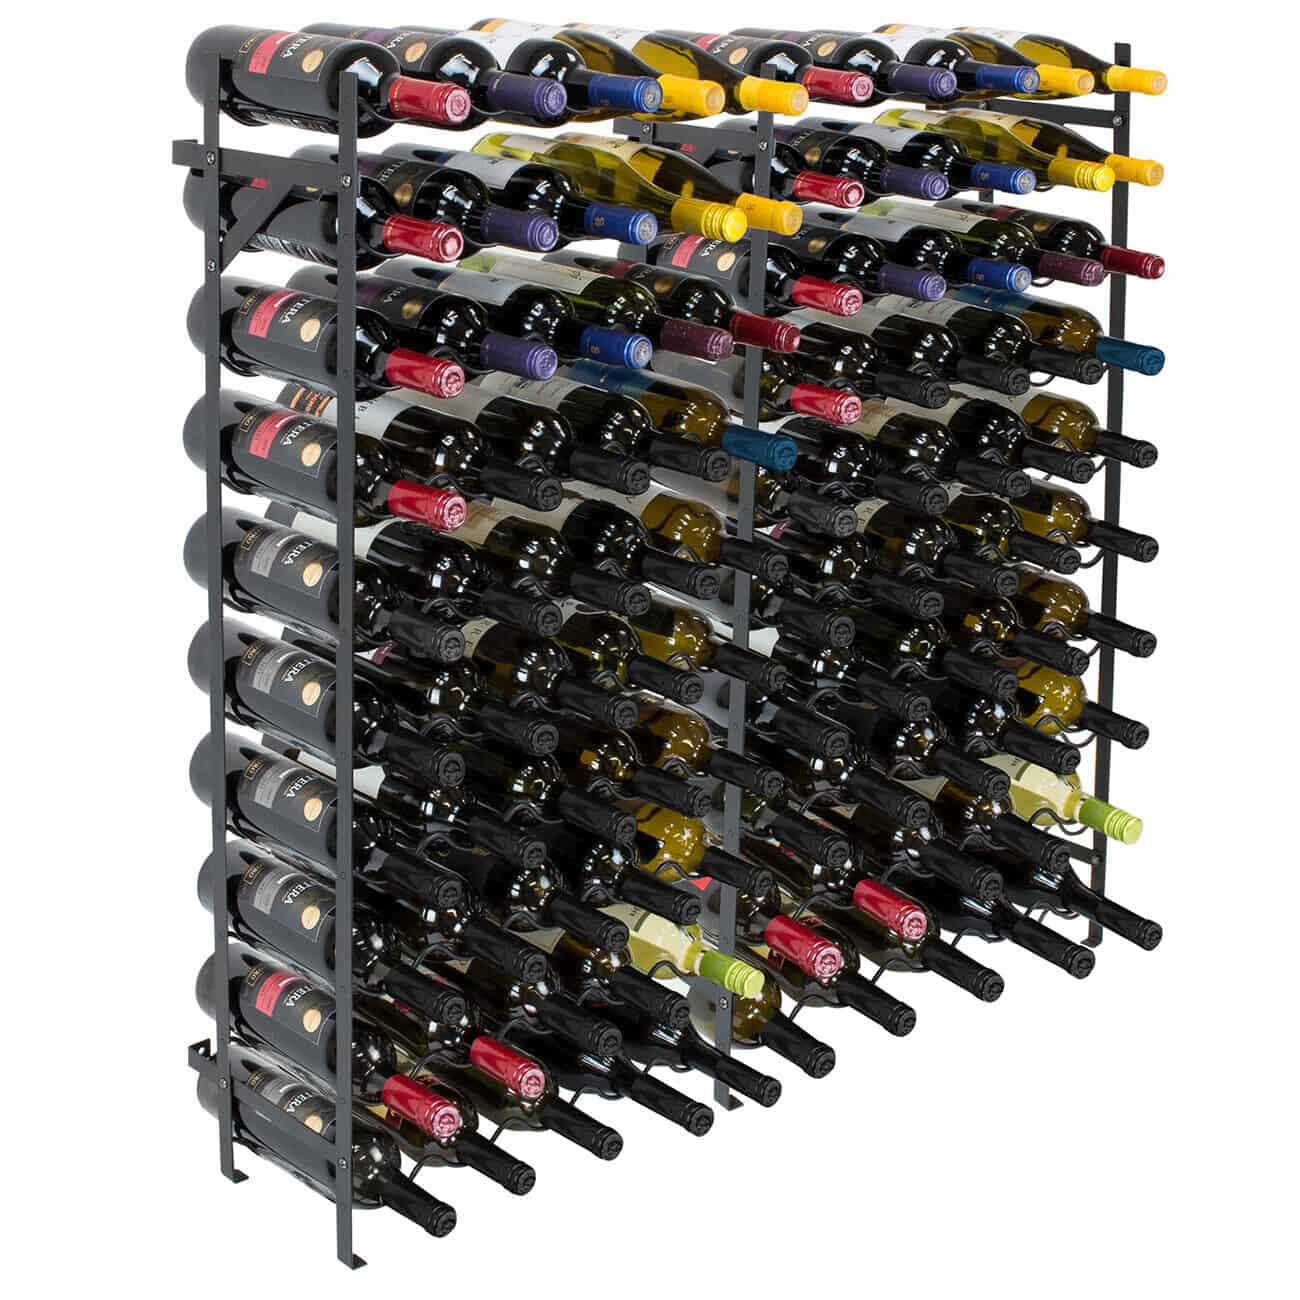 A wine rack with many bottles in it.